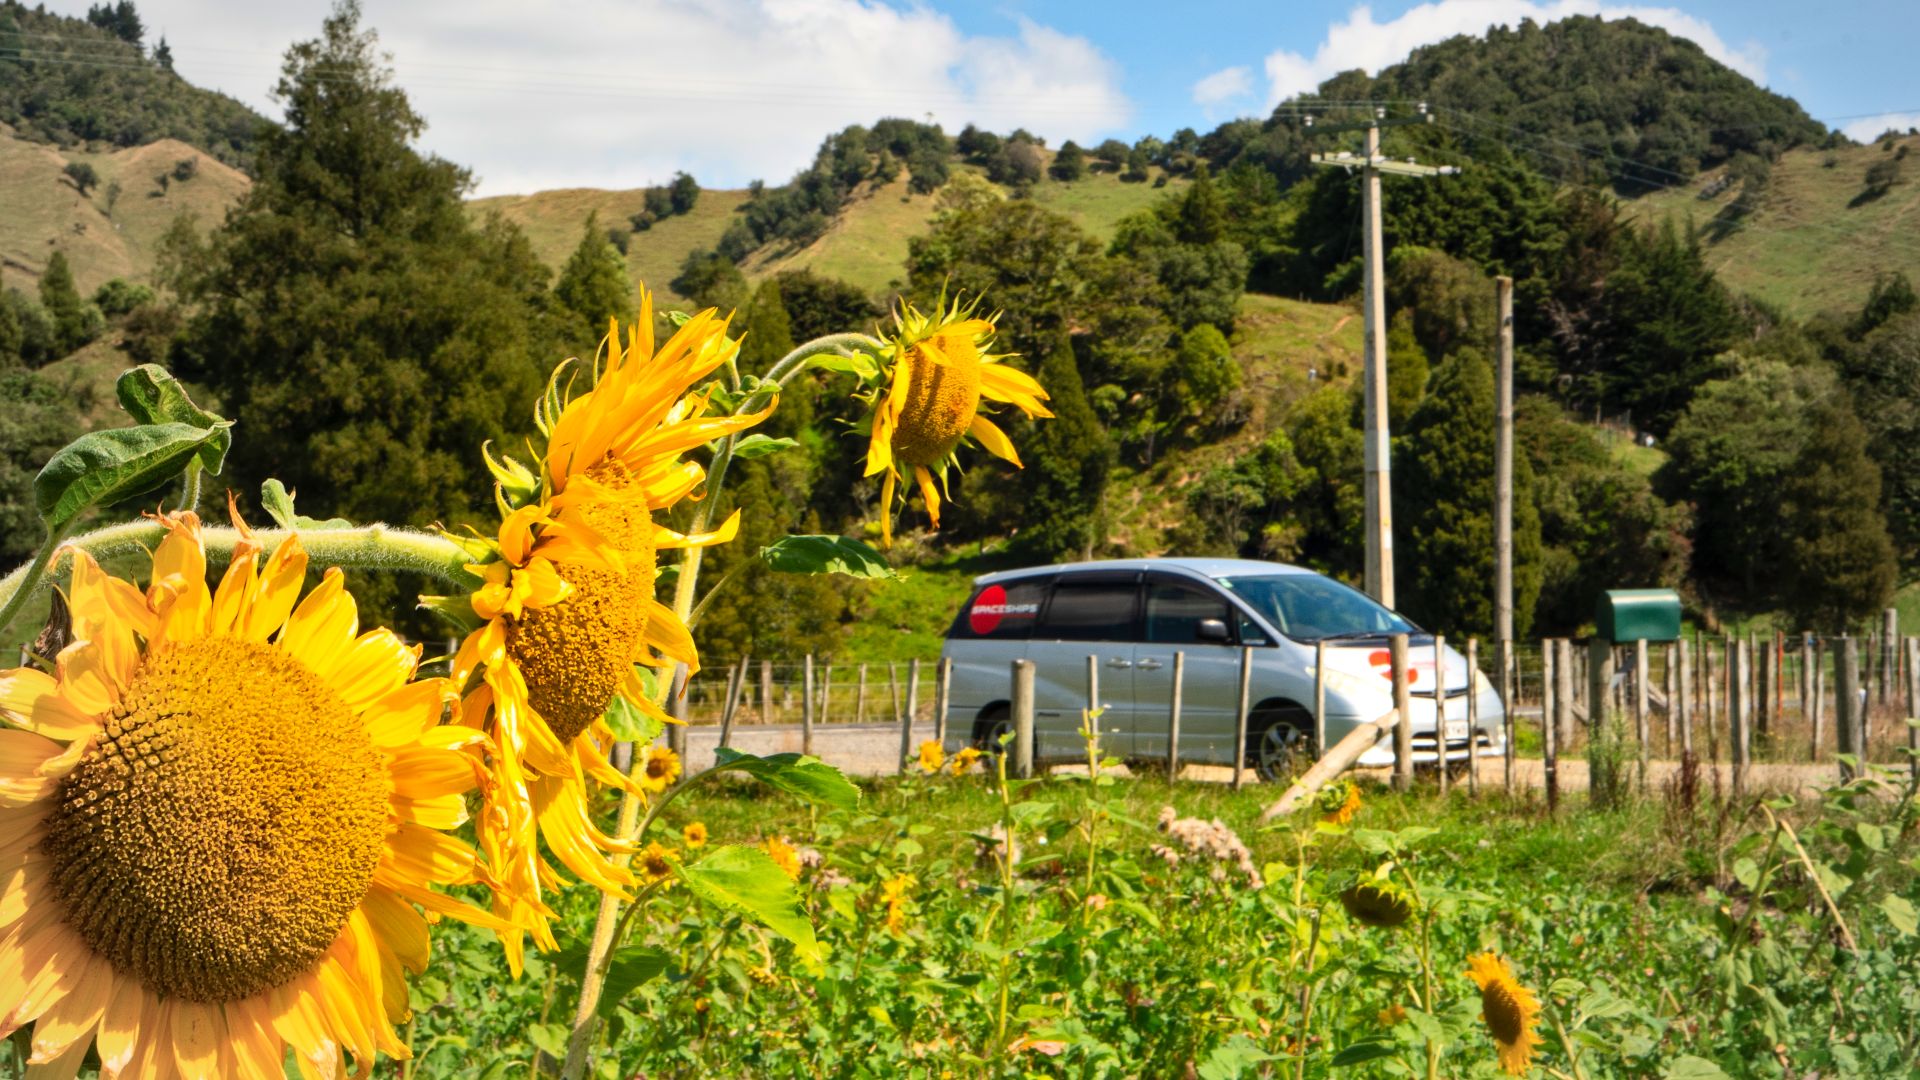 Spring in New Zealand: see why it's a great season for camping